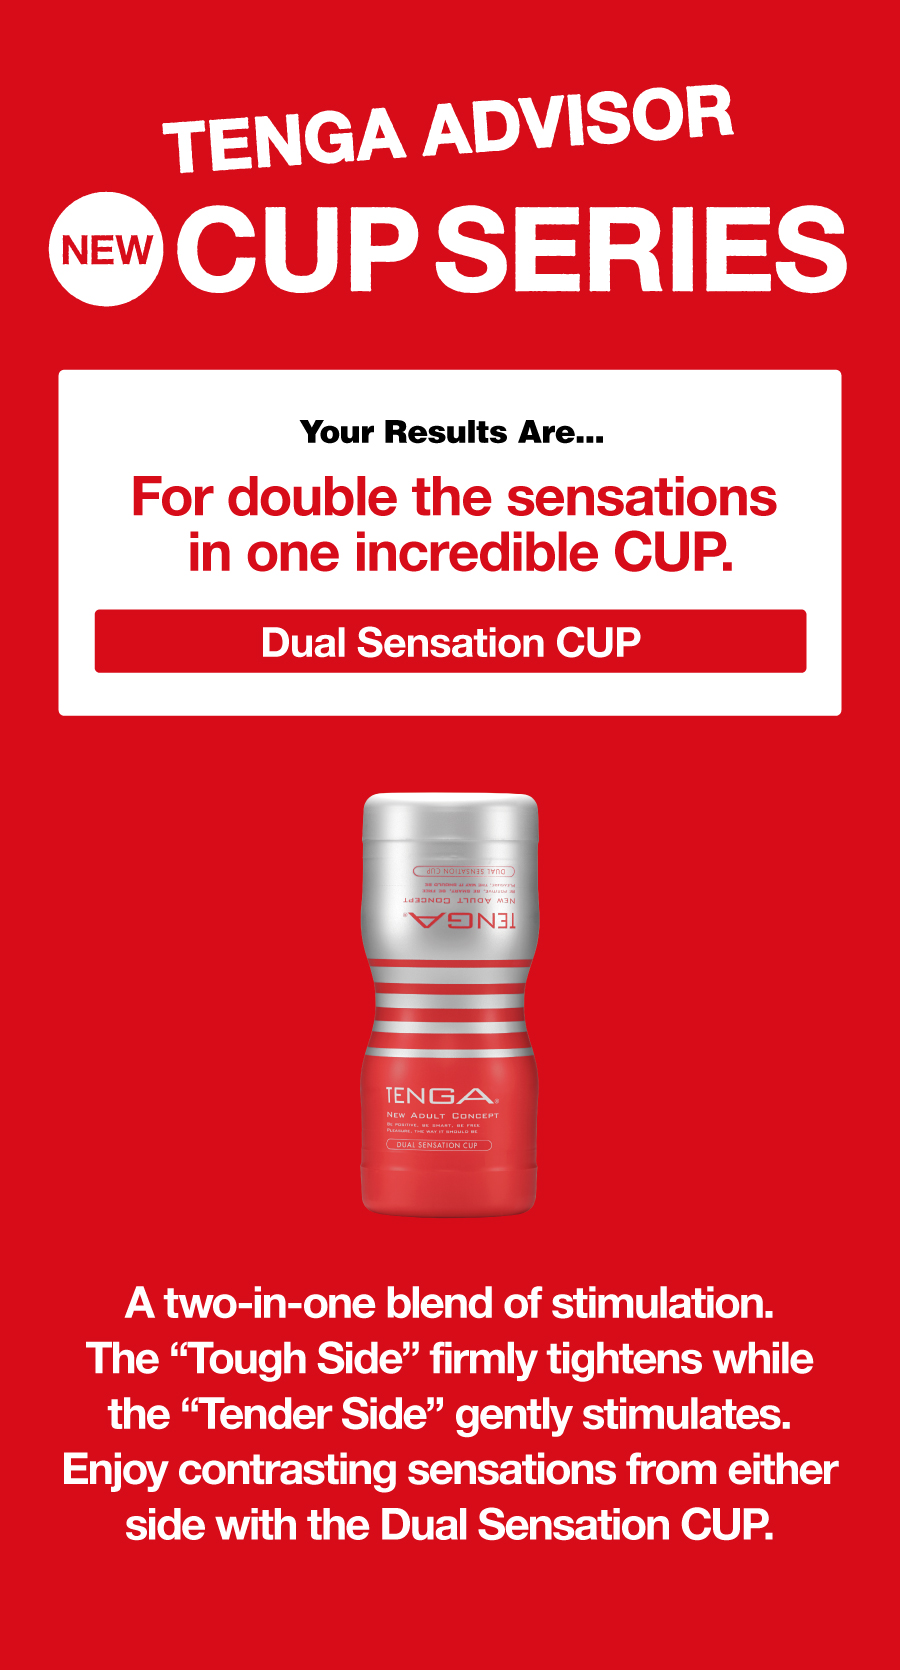 TENGA ADVISOR NEW CUP SERIES Your Results Are... For double the sensations in one incredible CUP. Dual Sensation CUP A two-in-one blend of stimulation. The “Tough Side” firmly tightens while the “Tender Side” gently stimulates. Enjoy contrasting sensations from either side with the Dual Sensation CUP.